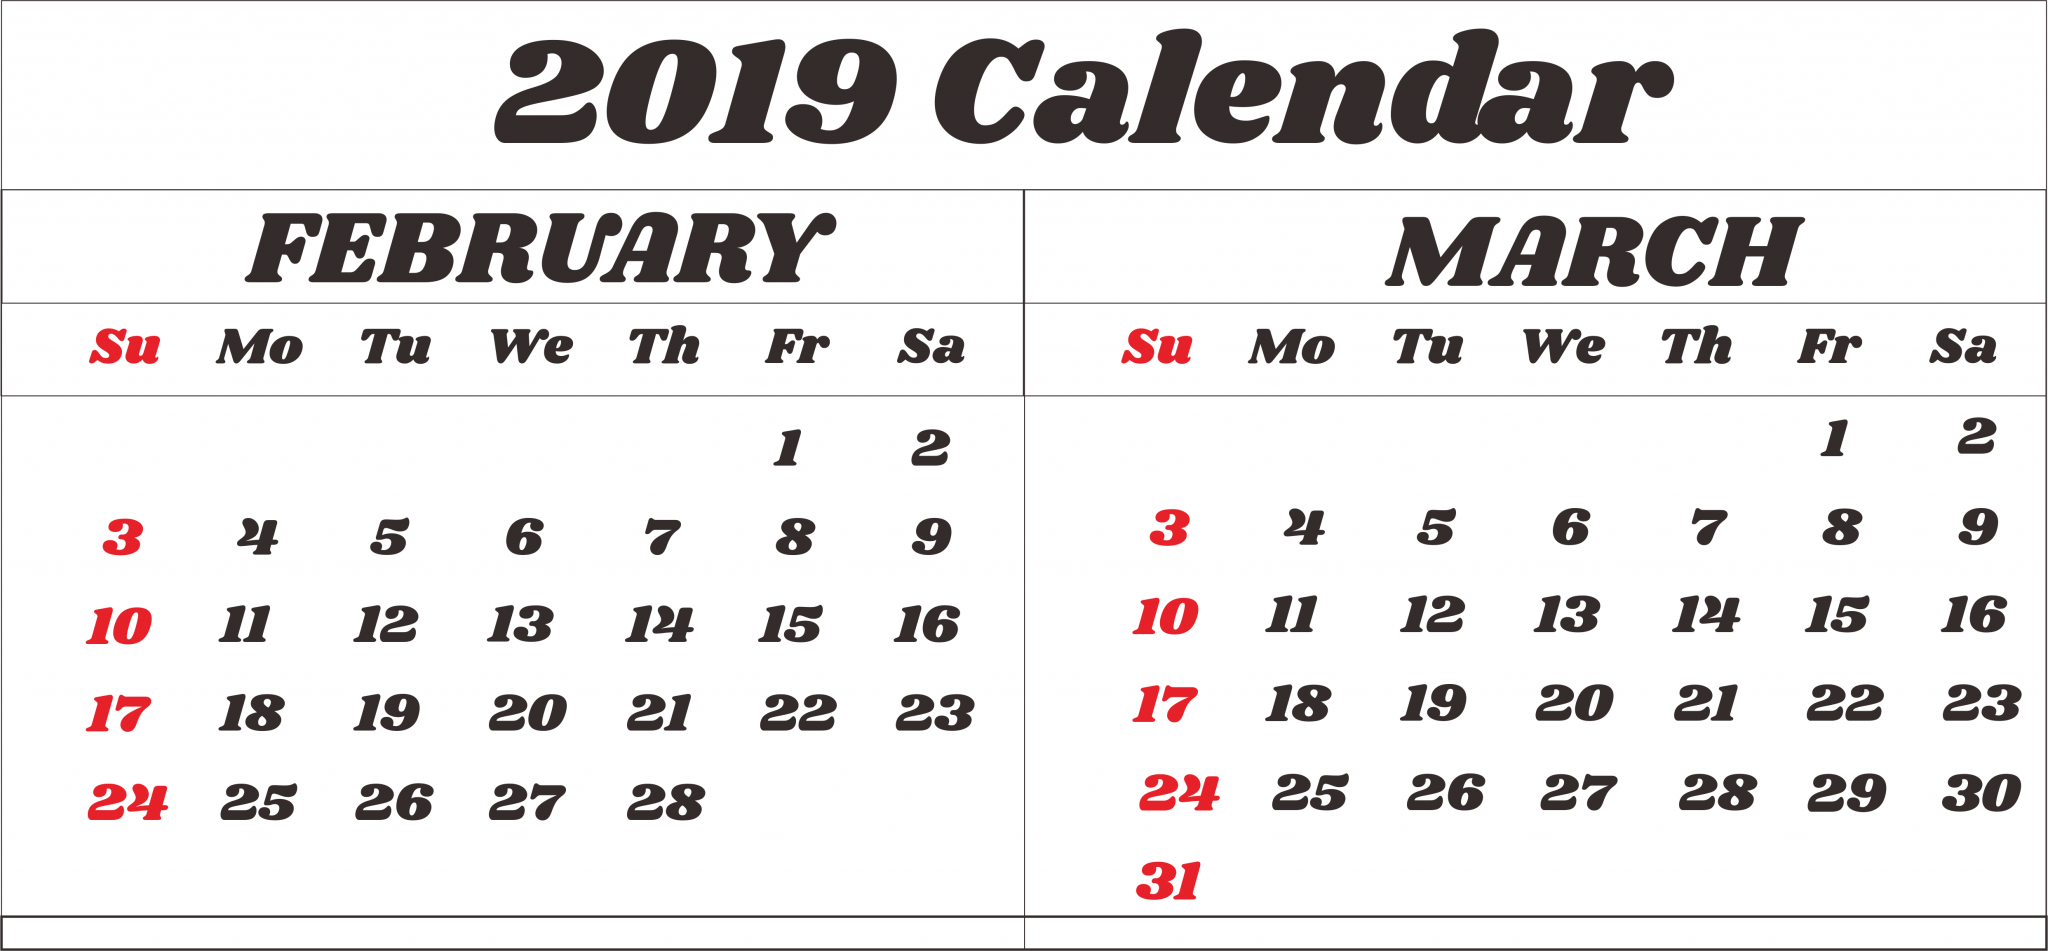 Calendar of February and March 2019